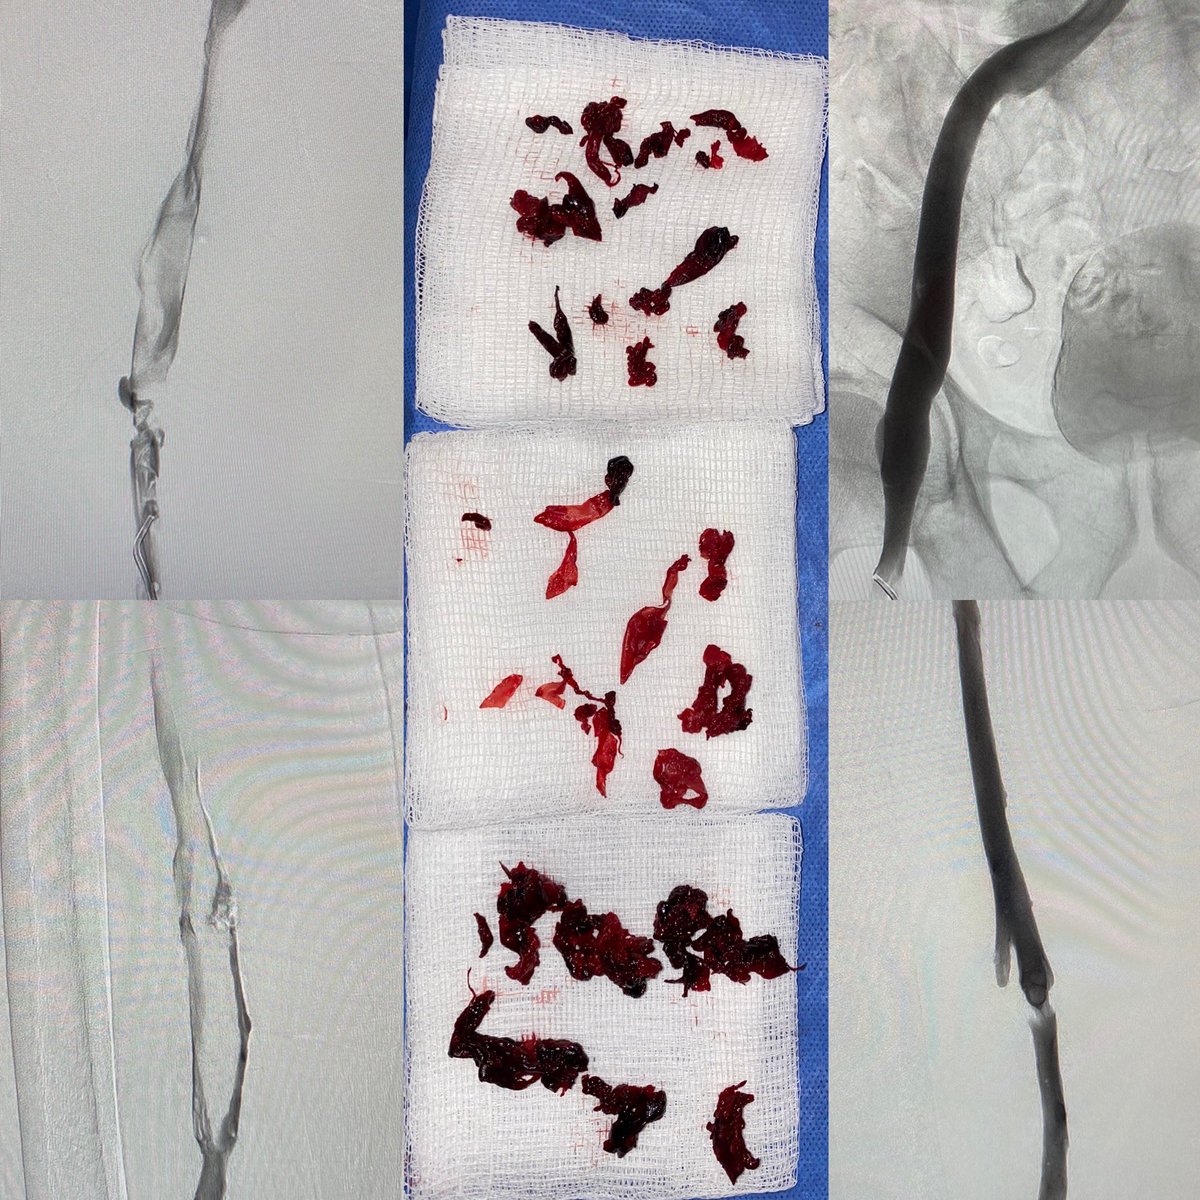 LLE dvt in a patient with stage 4 lung cancer.  SO much clot. Single session treatment. @InariMedical #ClotTriever #notpa